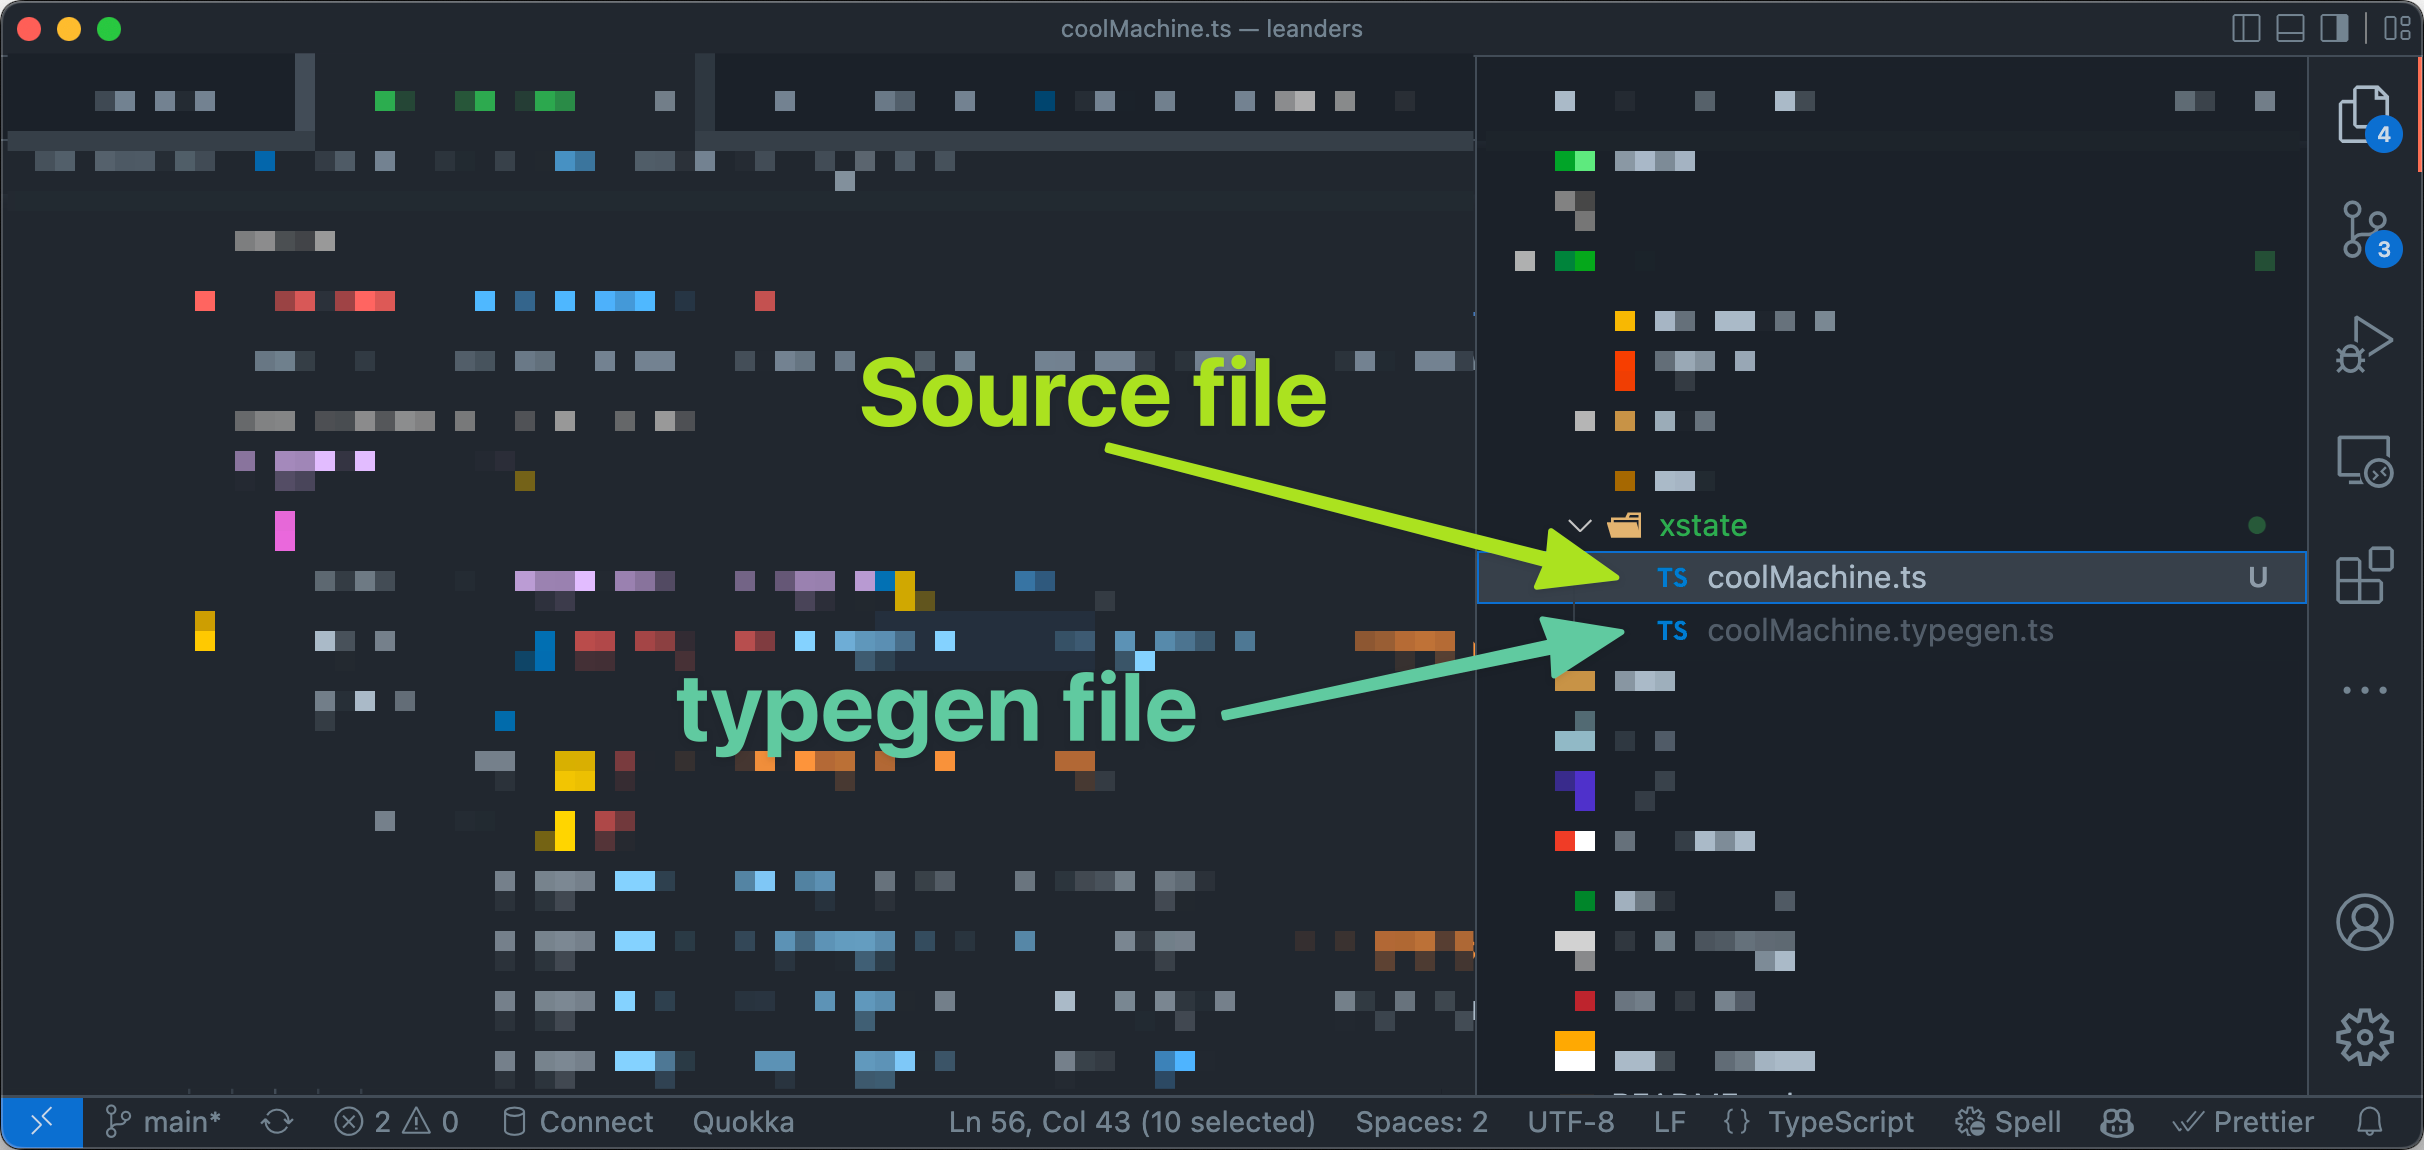 The source file in the VS Code explorer called coolMachine.ts is listed above the typegen file called coolMachine.typegen.ts.